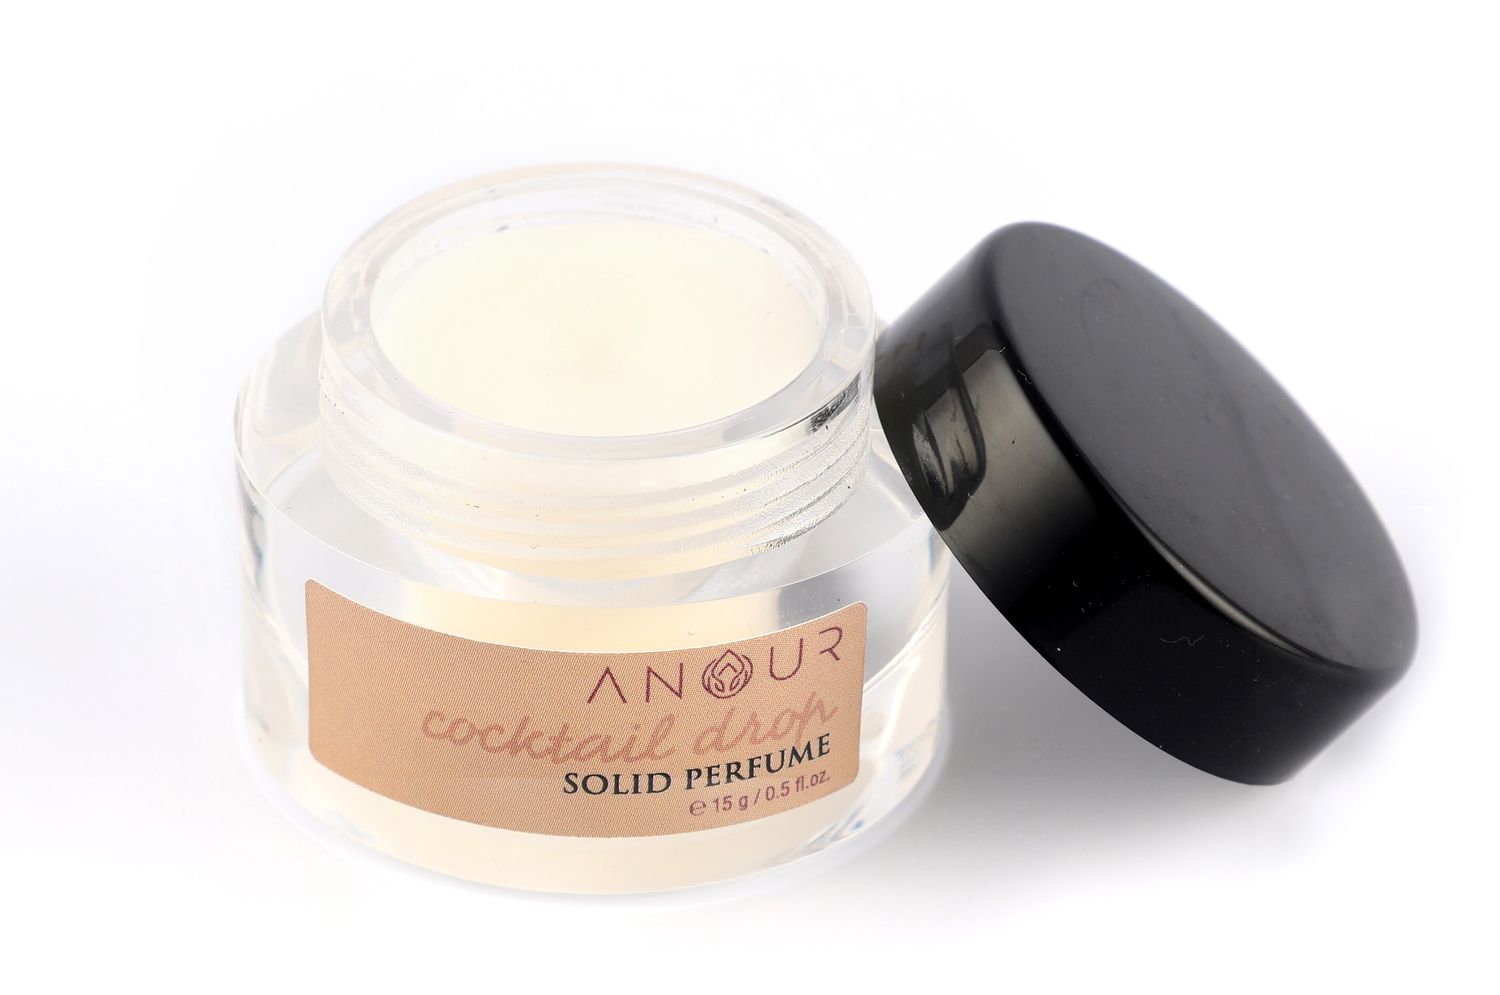 Buy Anour Cocktail Drop Solid Perfume (15 g) - Purplle